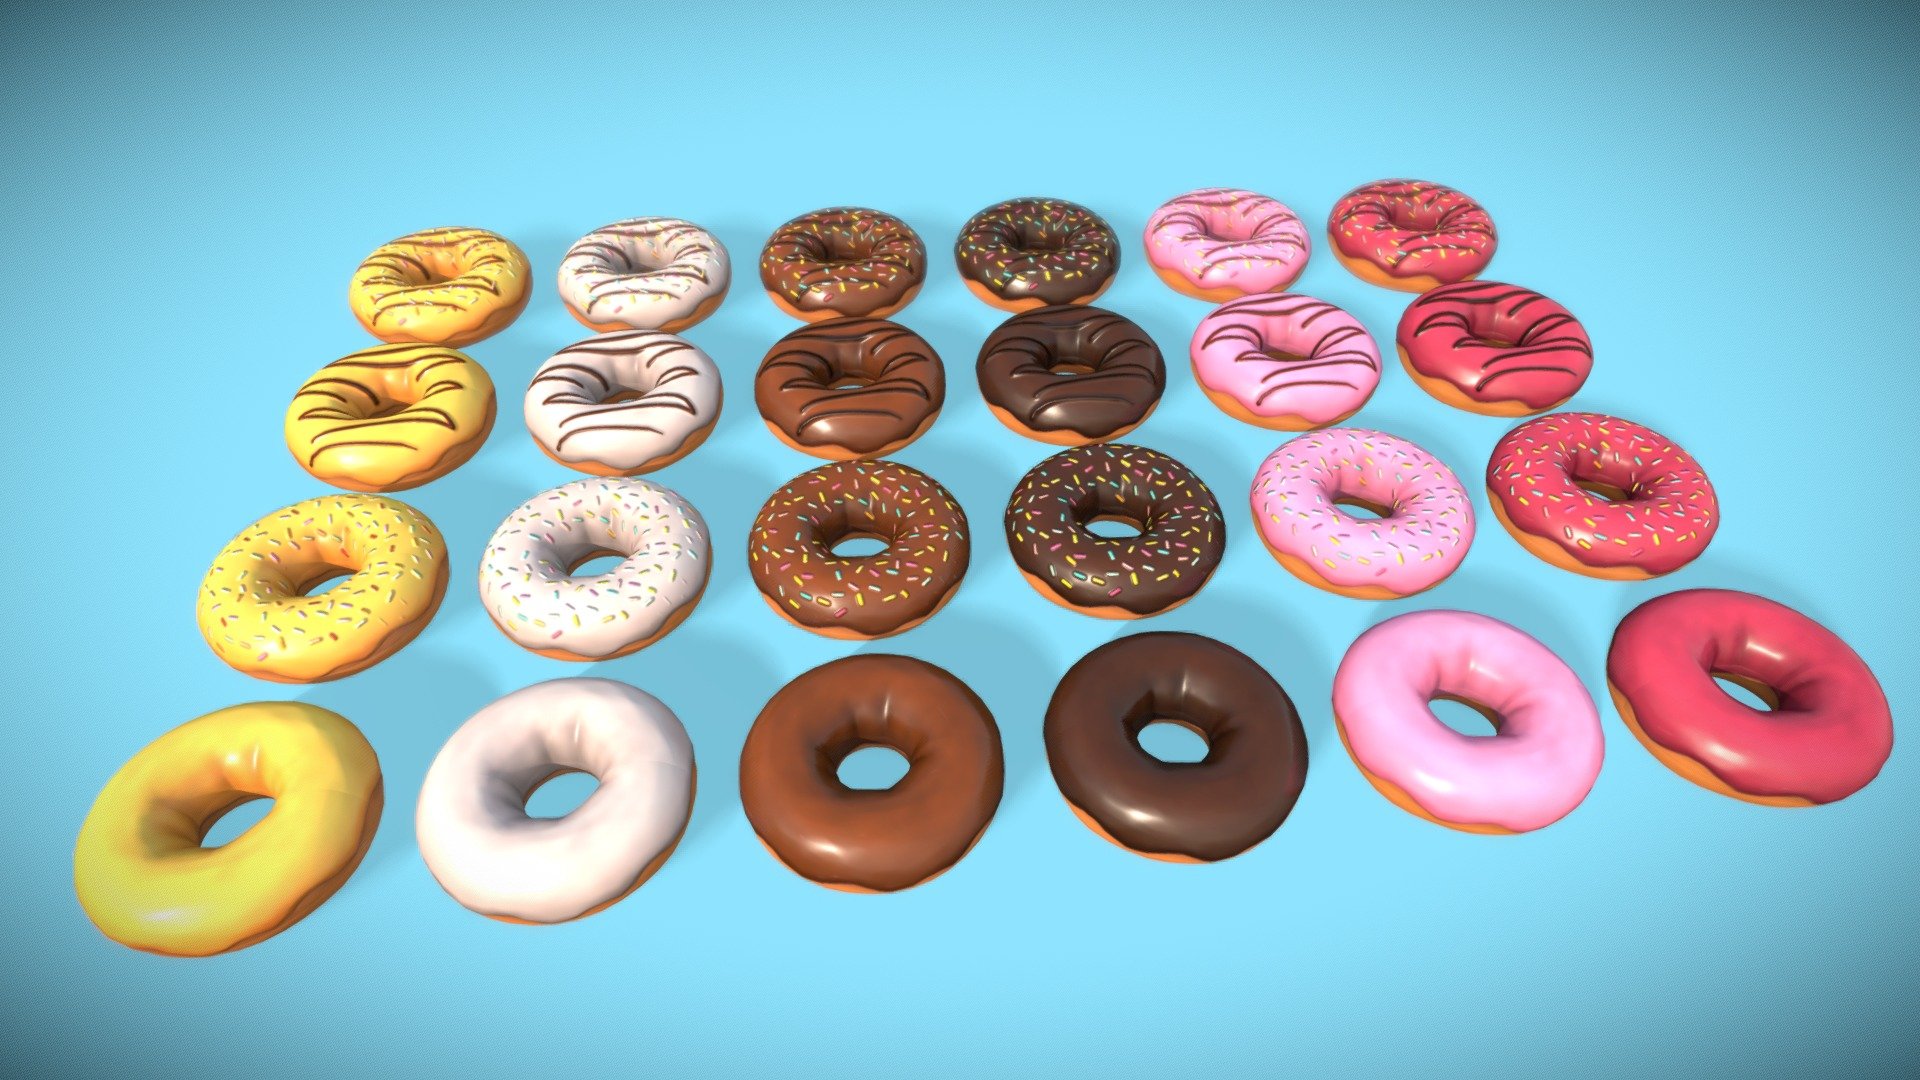 This delicious pack of donuts consists of 6 flavors: Banana, Cream, Cherry, Chocolate, Dark chocolate, and Strawberry. Each flavor has 4 variations: Plain, sprinkles, chocolate, and a chocolate sprinkles combination giving it a total of 24 different donuts! 

The donuts are game ready with PBR textures 3d model